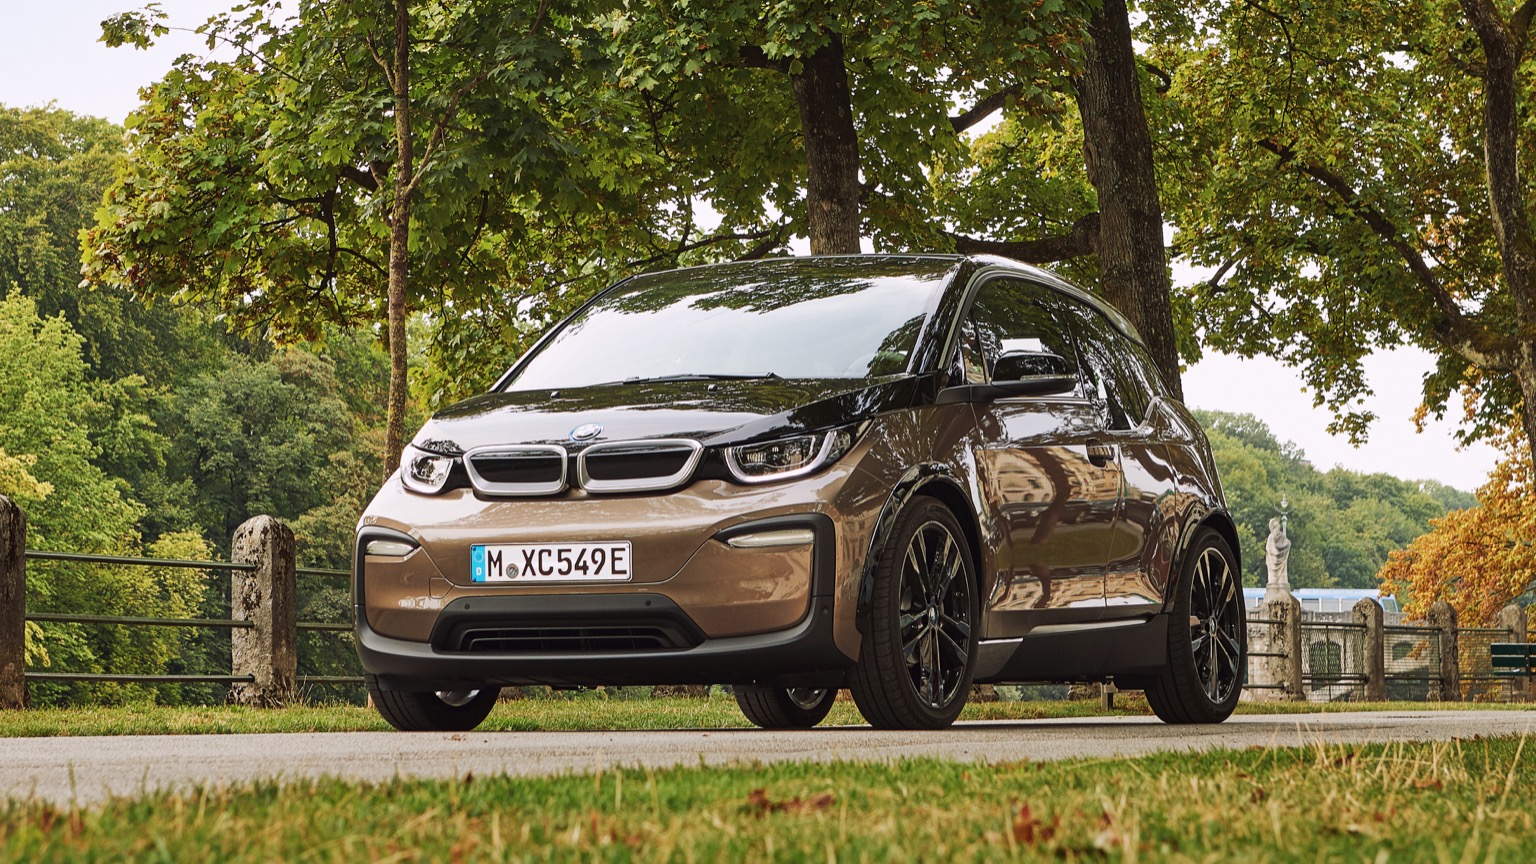 EV Charger Installations for BMW i3s